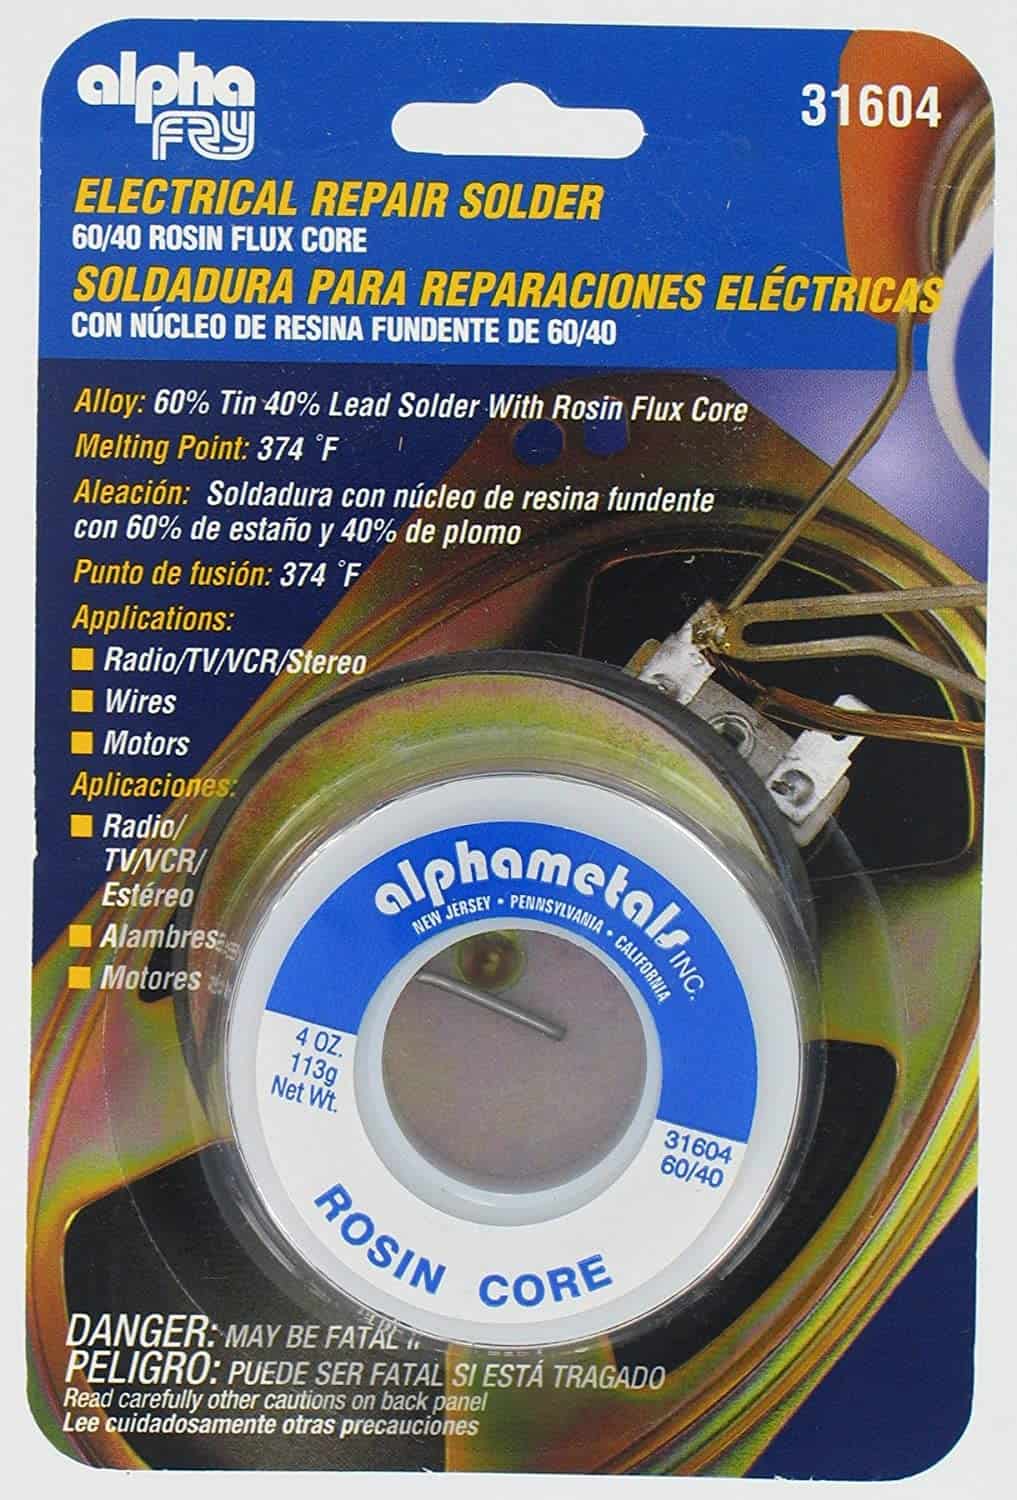 Best leaded rosin flux core soldering wire for large projects- Alpha Fry AT-31604s